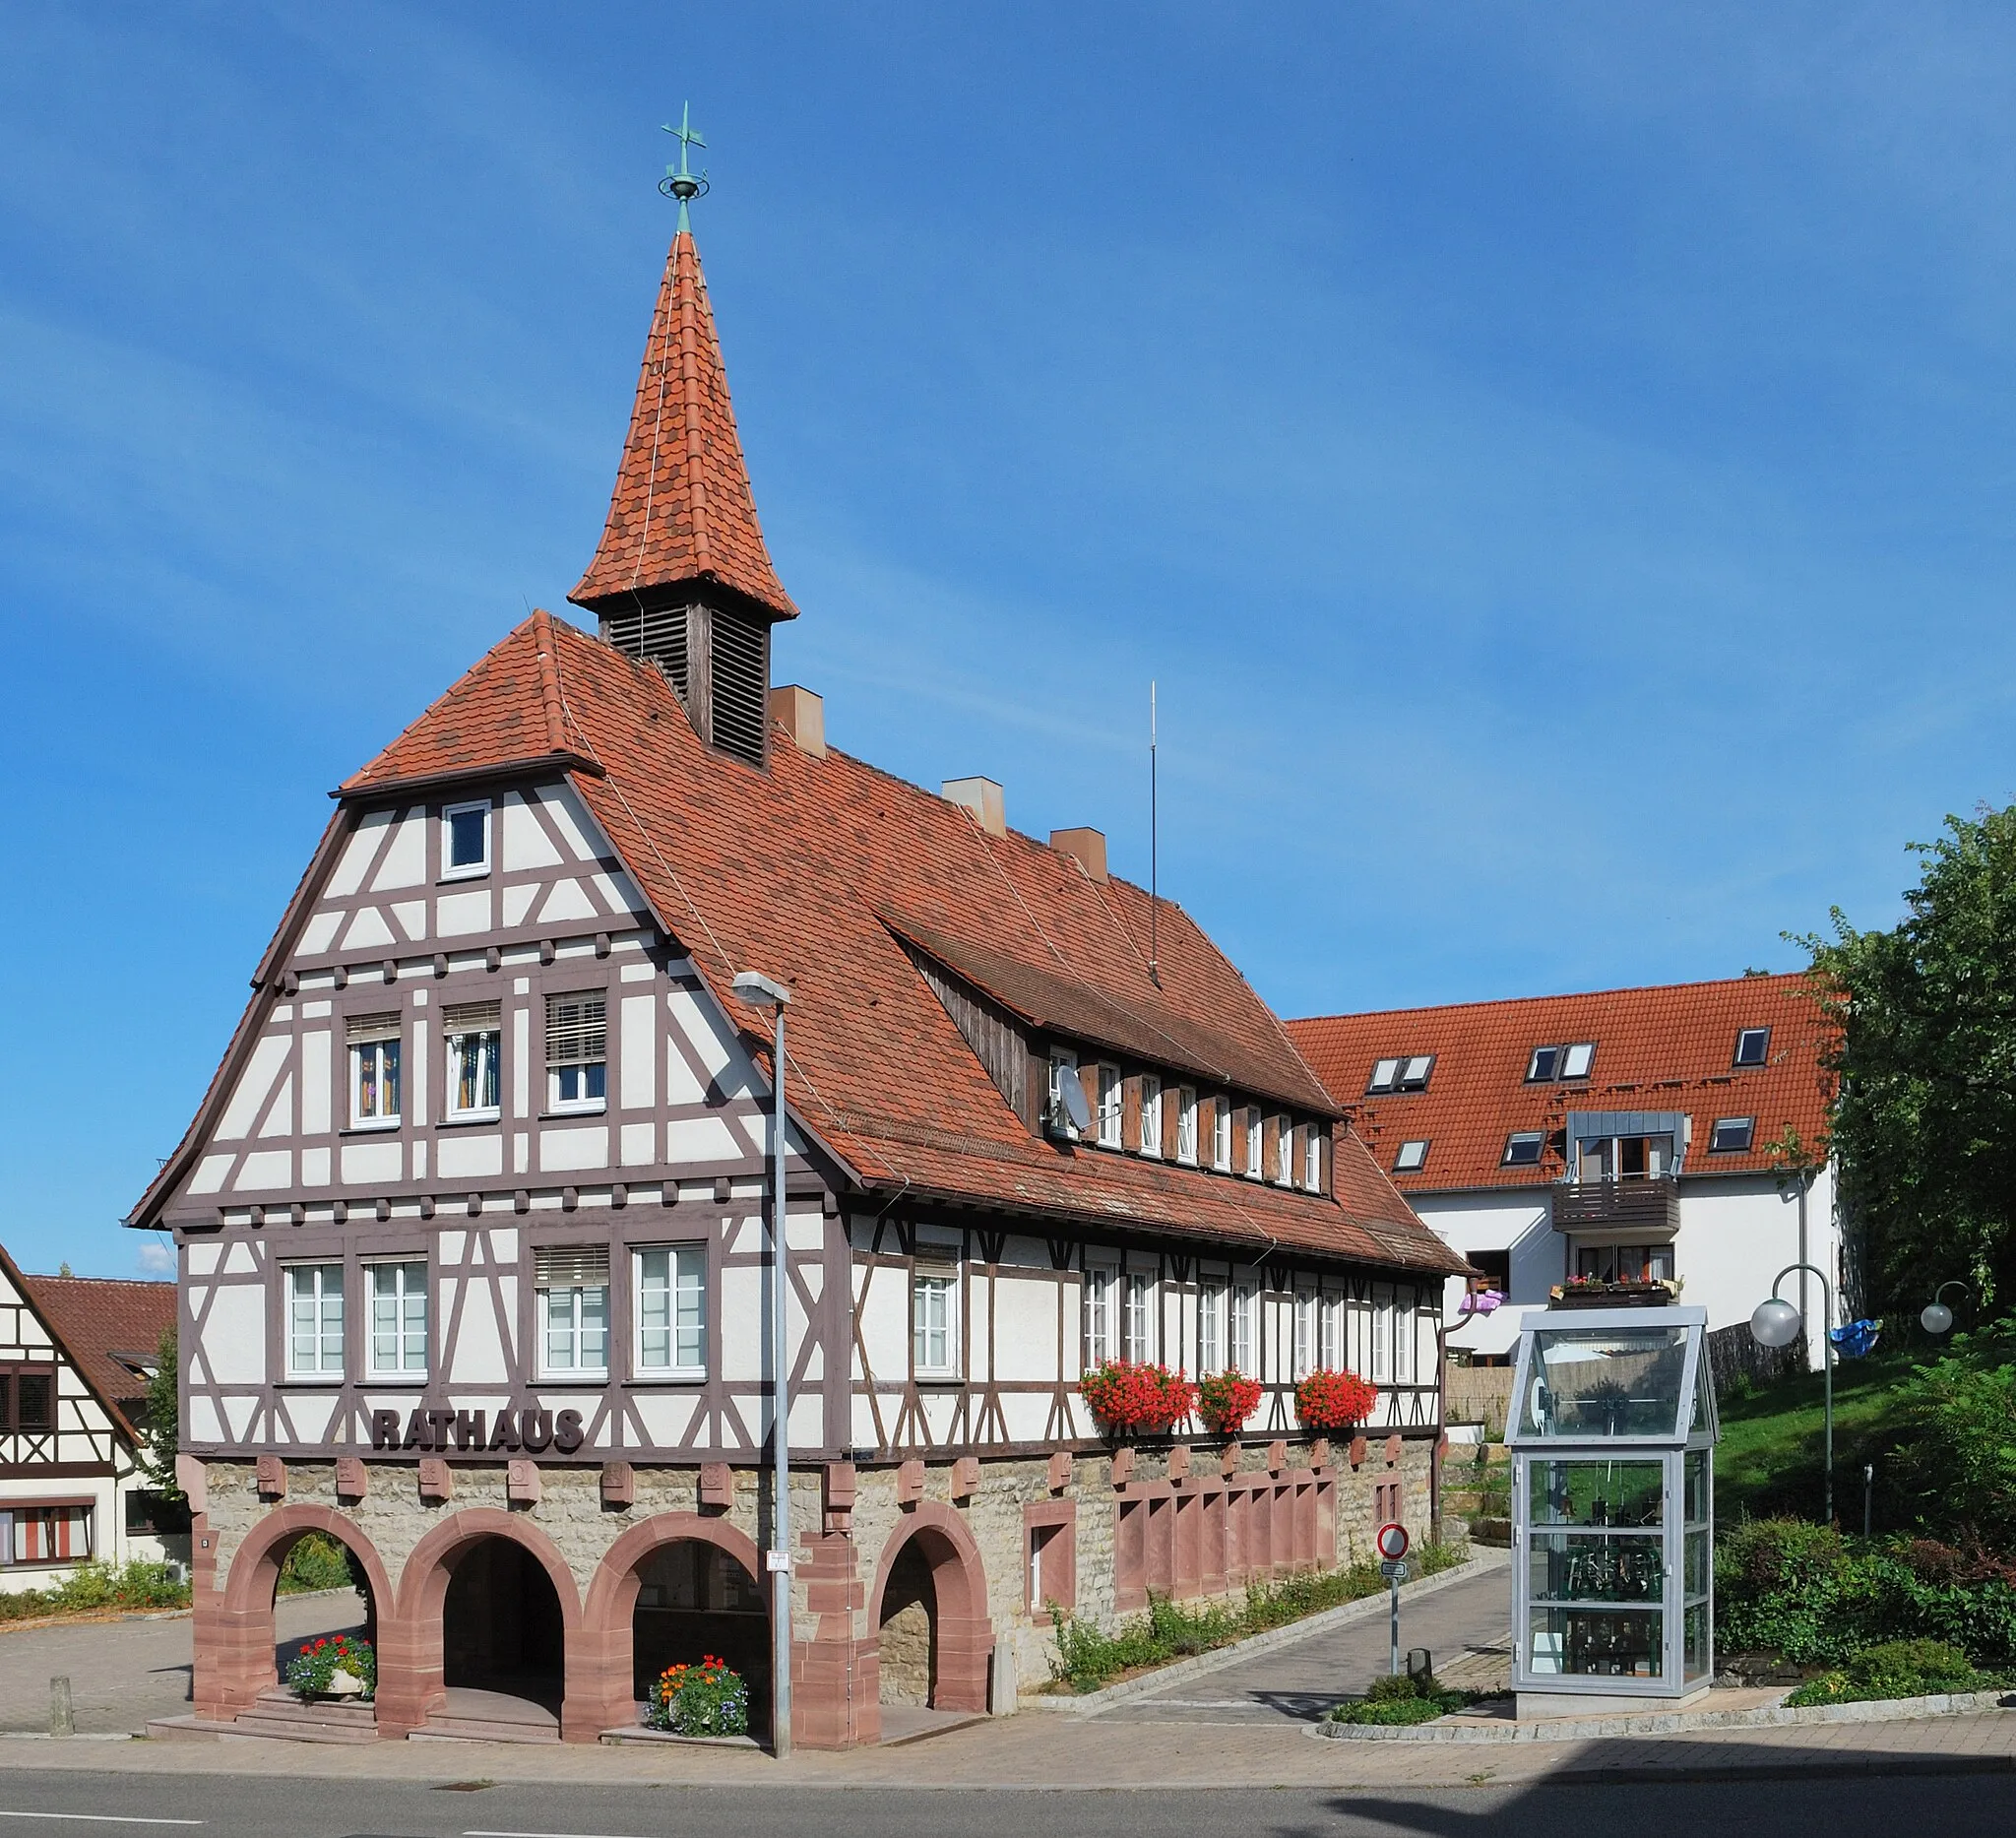 Photo showing: Town hall in Nussdorf (Baden-Württemberg, Germany).